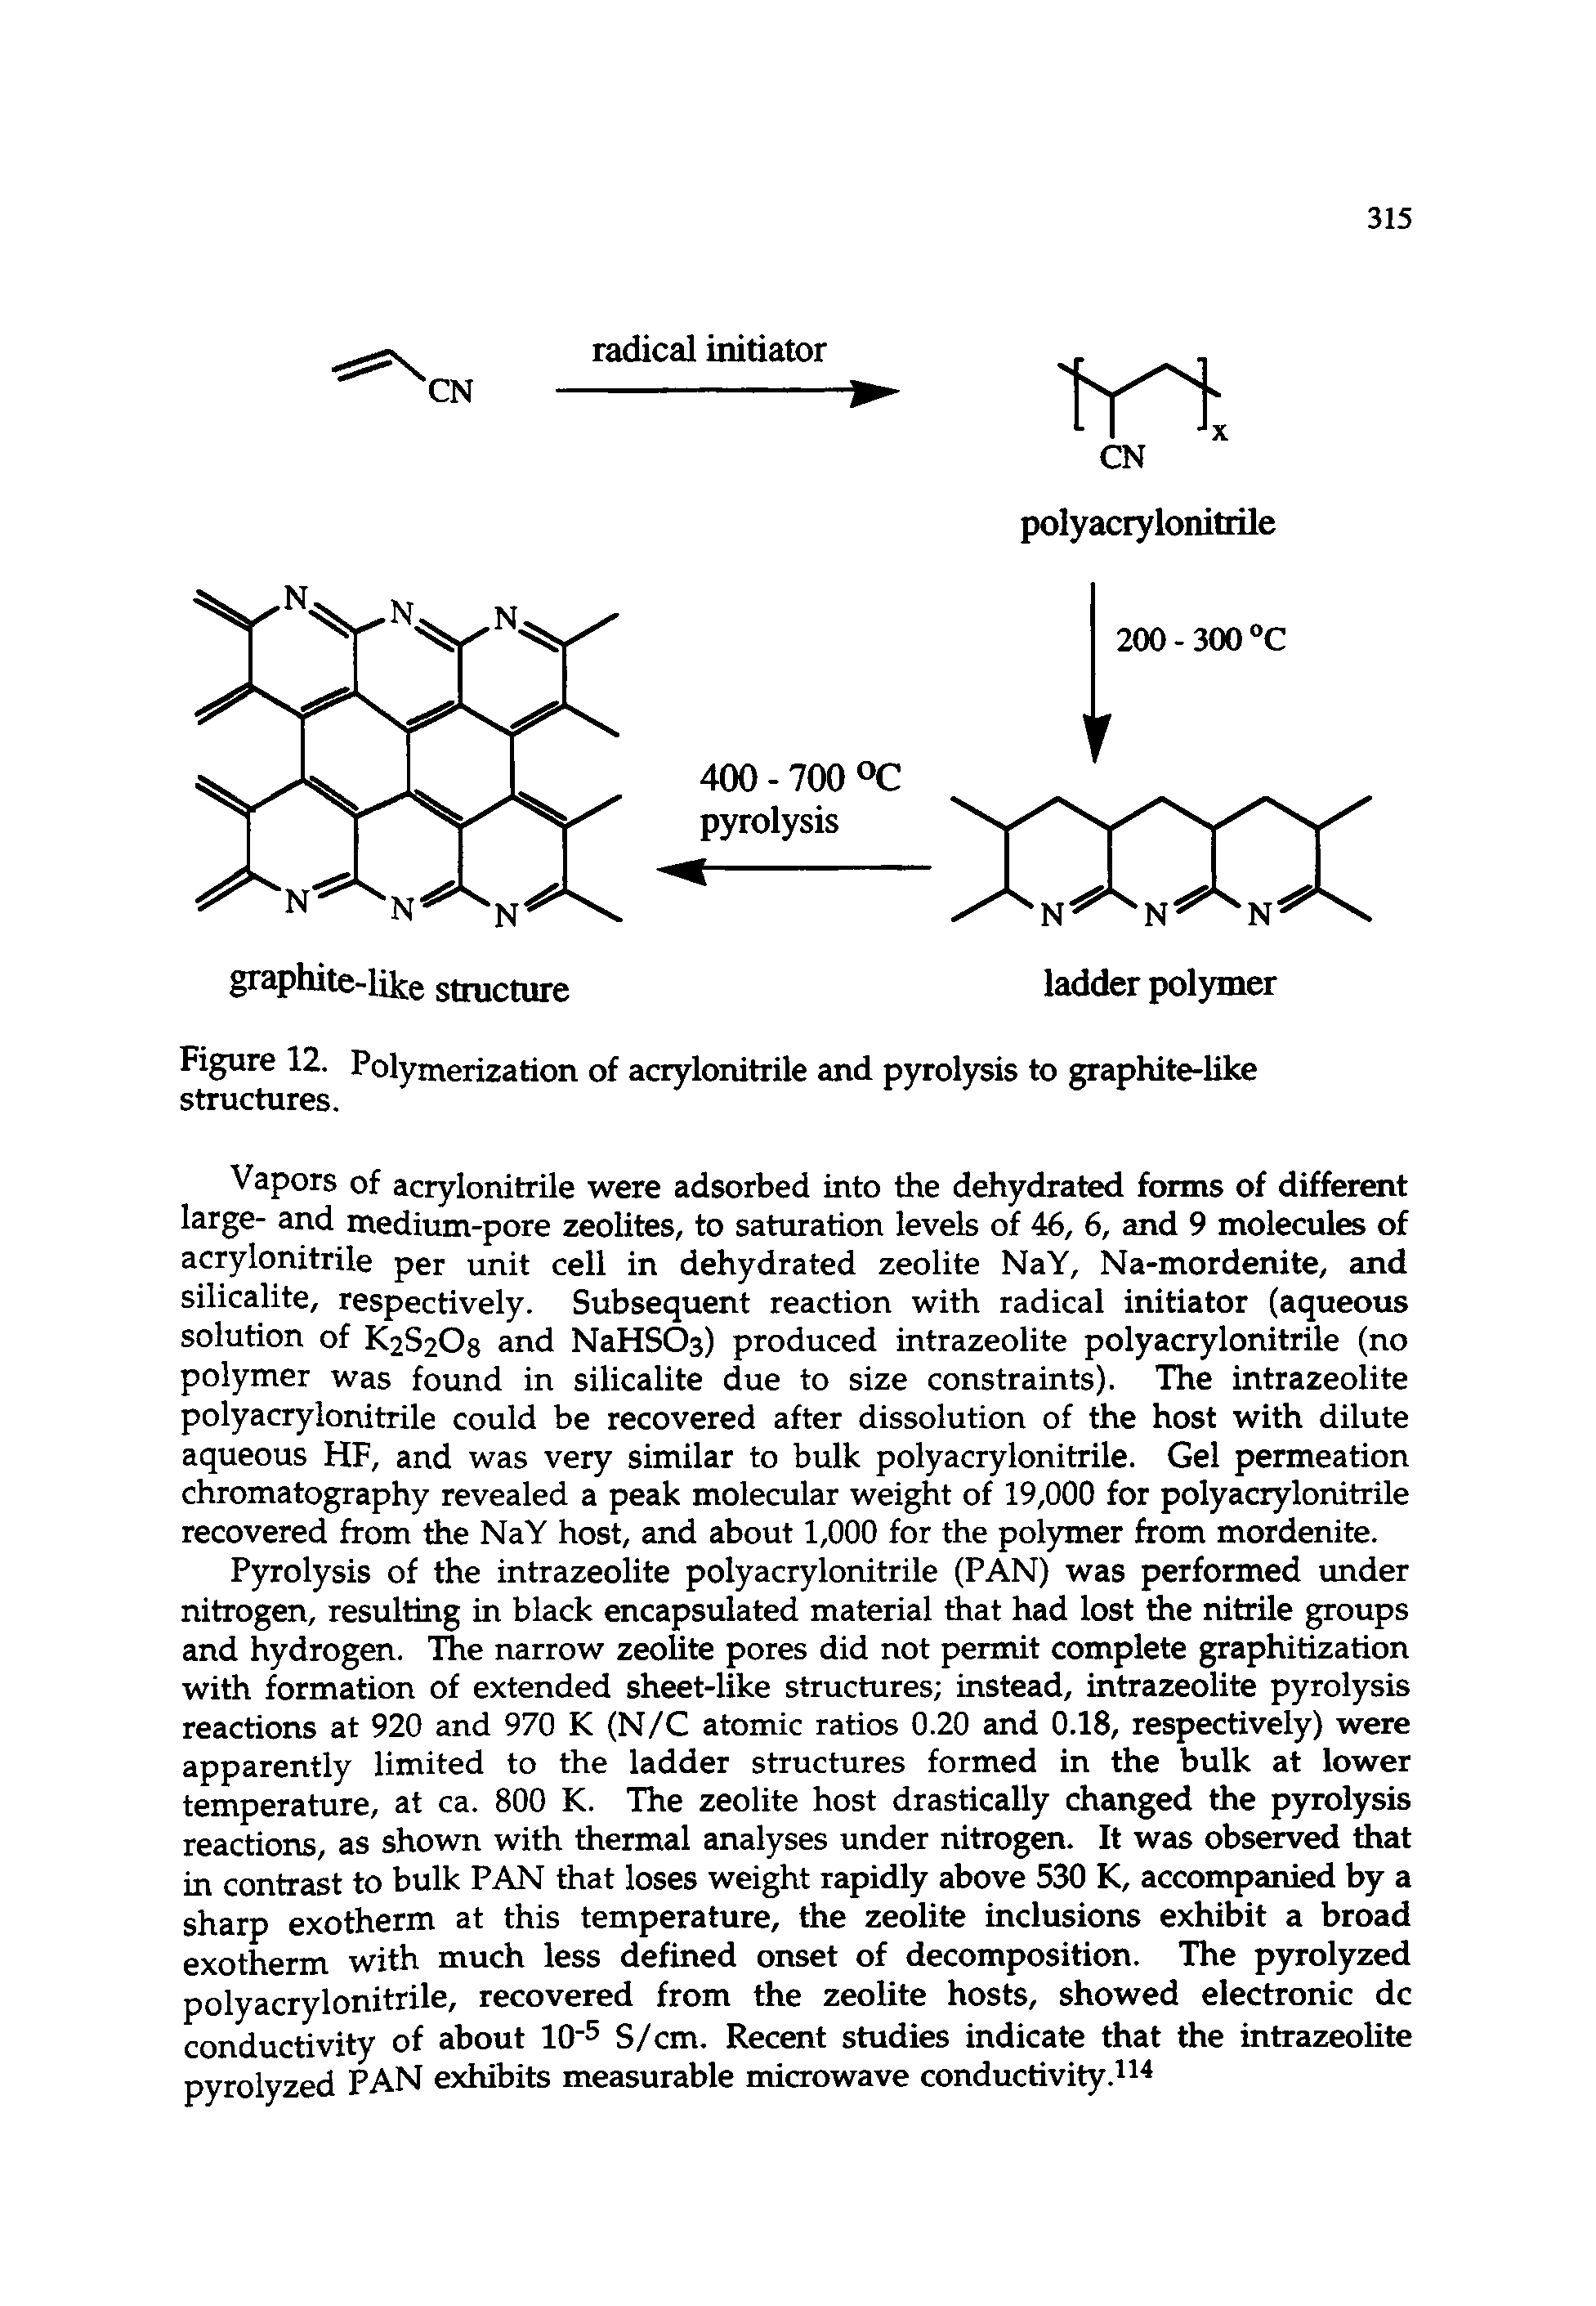 Figure 12. Polymerization of acrylonitrile and pyrolysis to graphite-like structures.